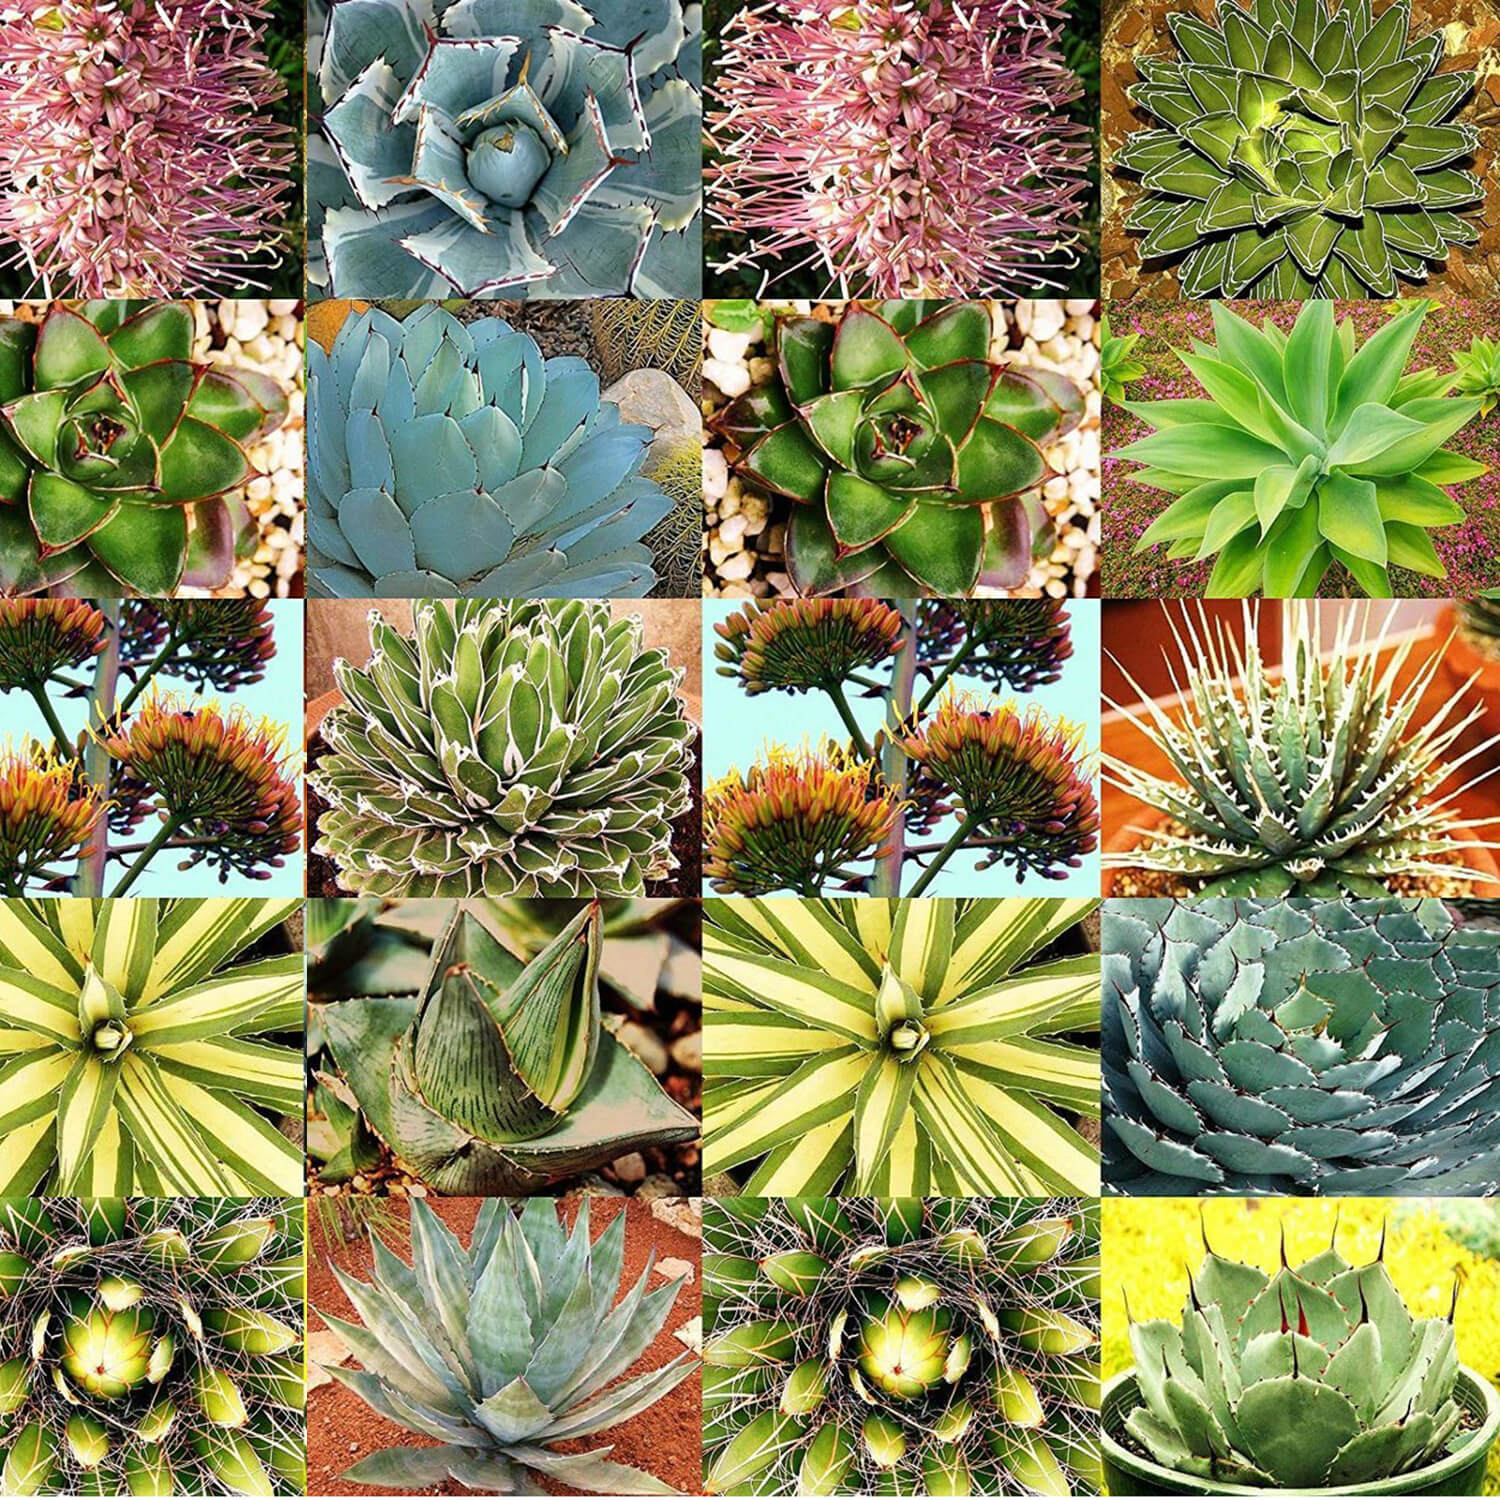 Agave mix - 10 seeds